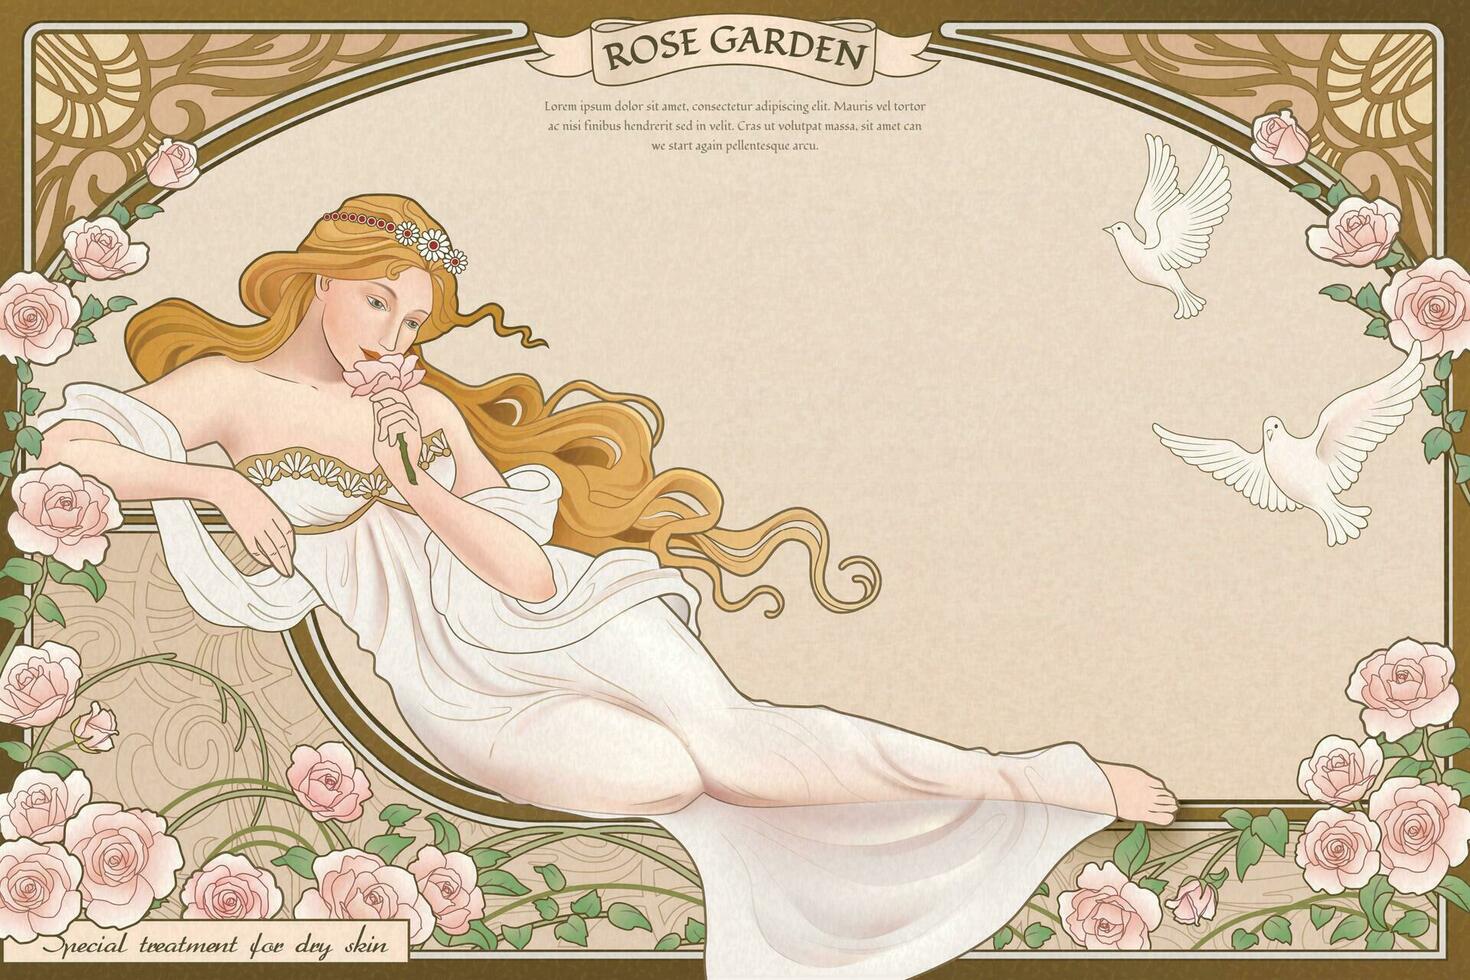 Elegant art nouveau style goddess lying nearby roses garden with elaborated frame vector